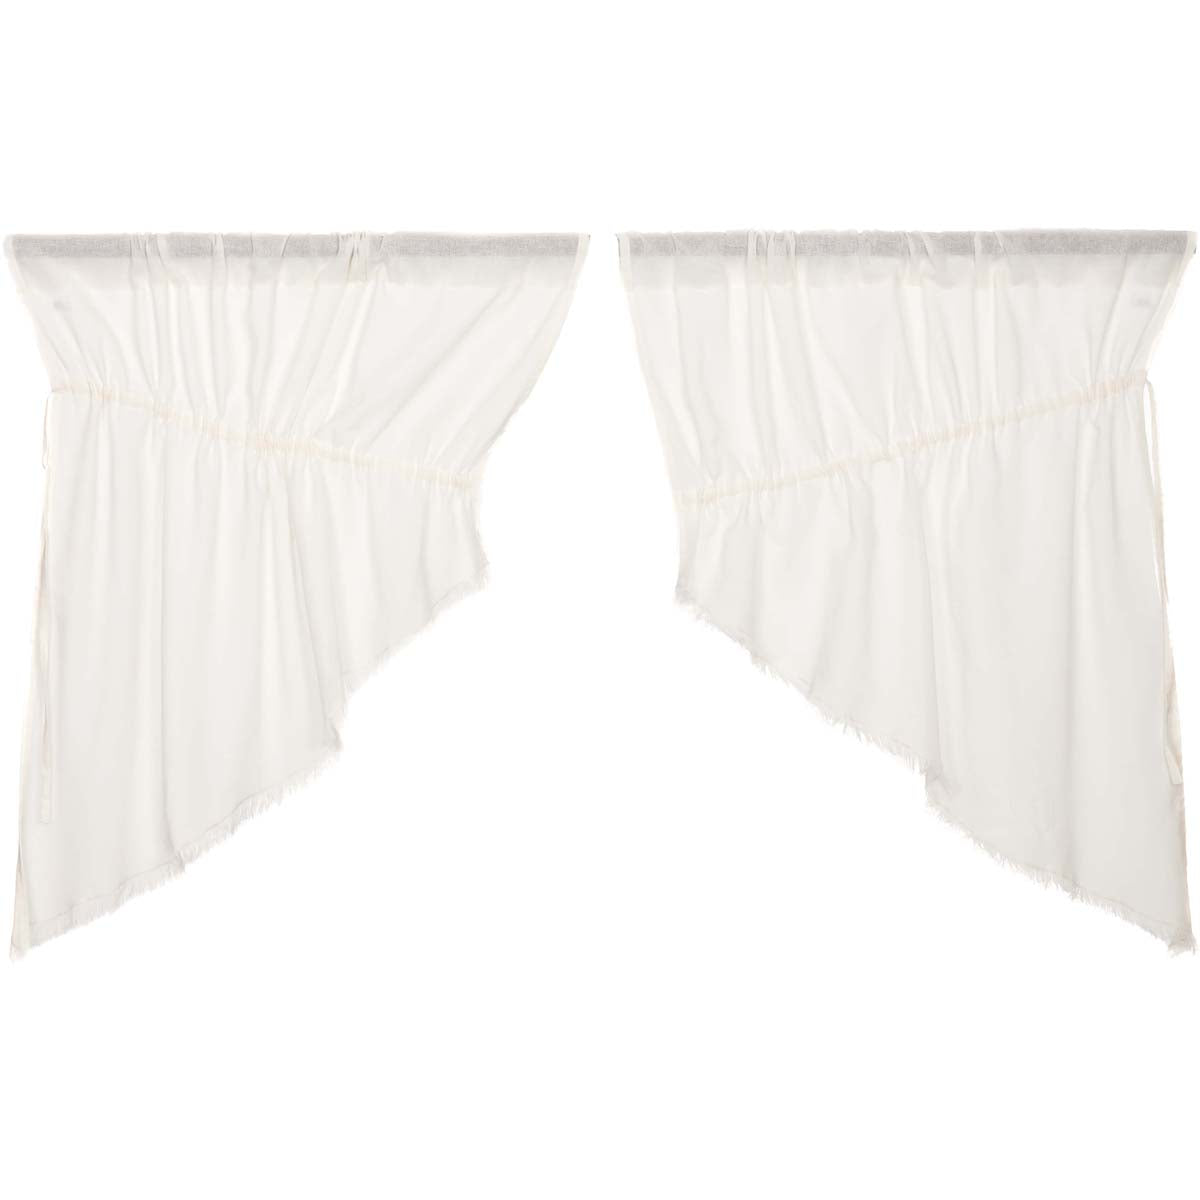 April & Olive Tobacco Cloth Antique White Prairie Swag Fringed Set of 2 36x36x18 By VHC Brands